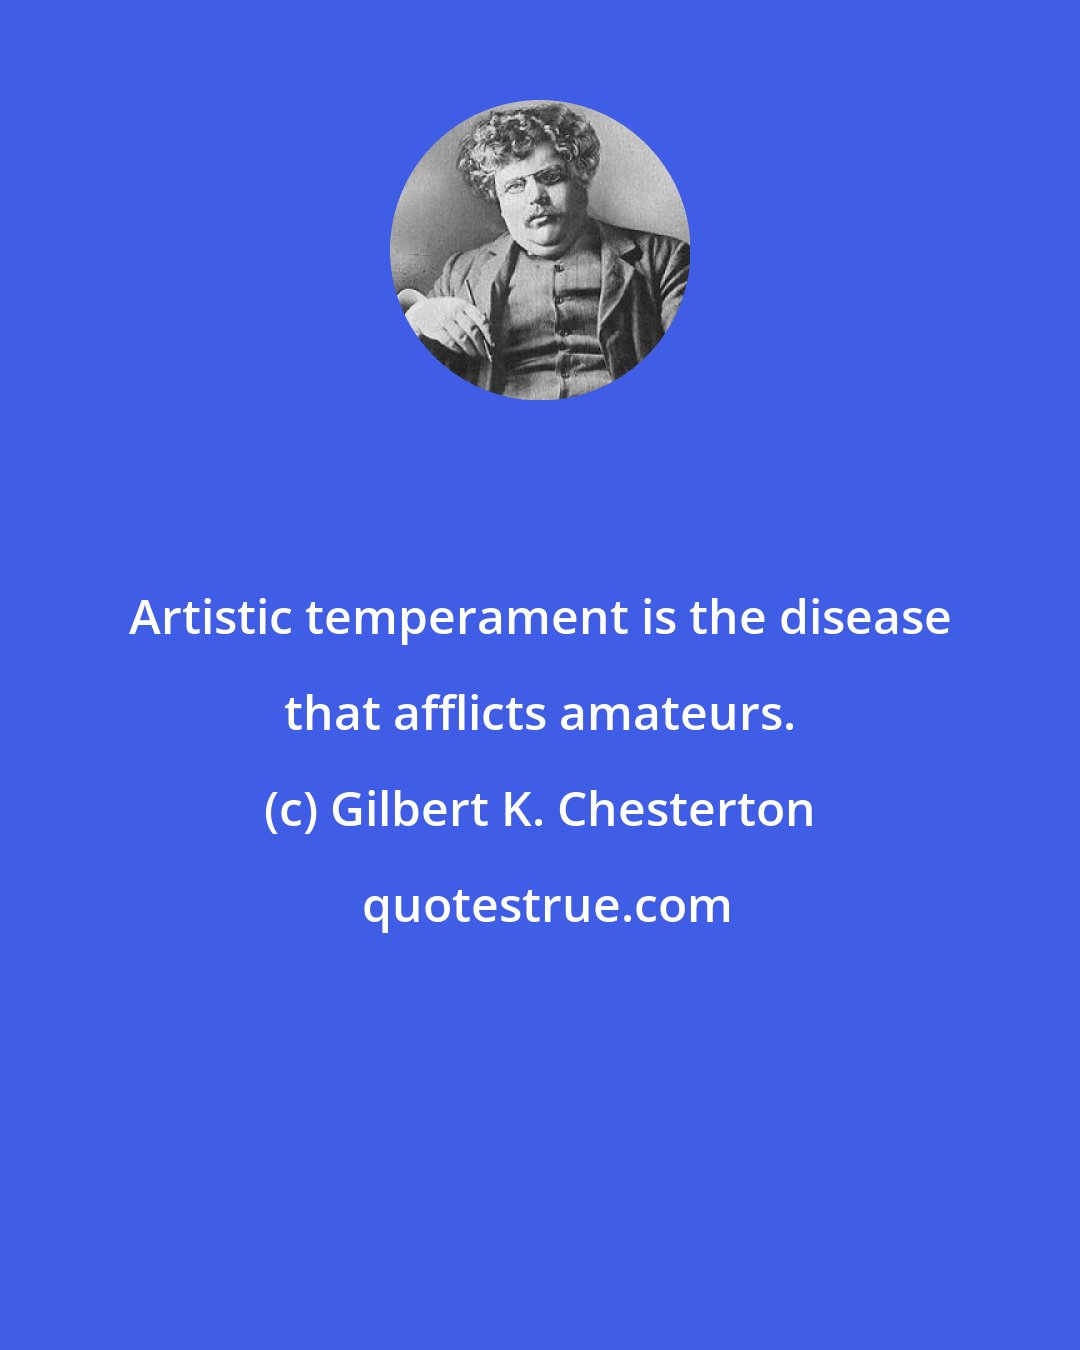 Gilbert K. Chesterton: Artistic temperament is the disease that afflicts amateurs.